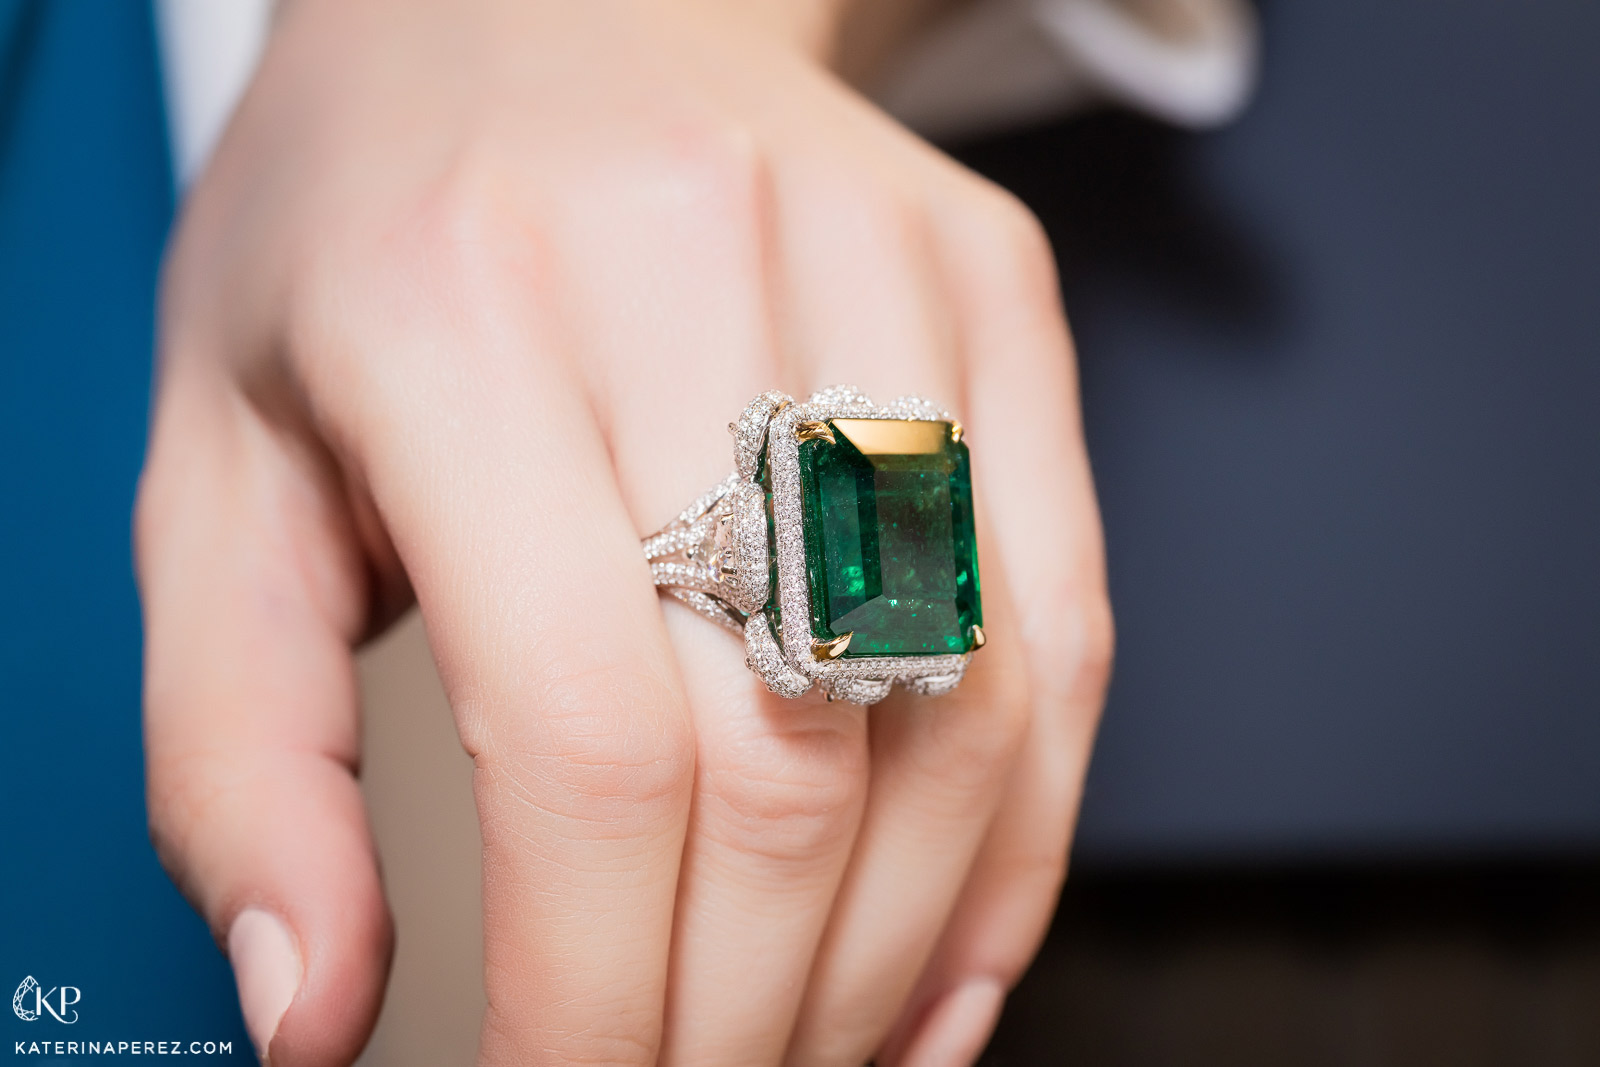 Takat cocktail ring with 24 cts Colombian emerald and 8 cts of diamonds. Photo by Simon Martner.